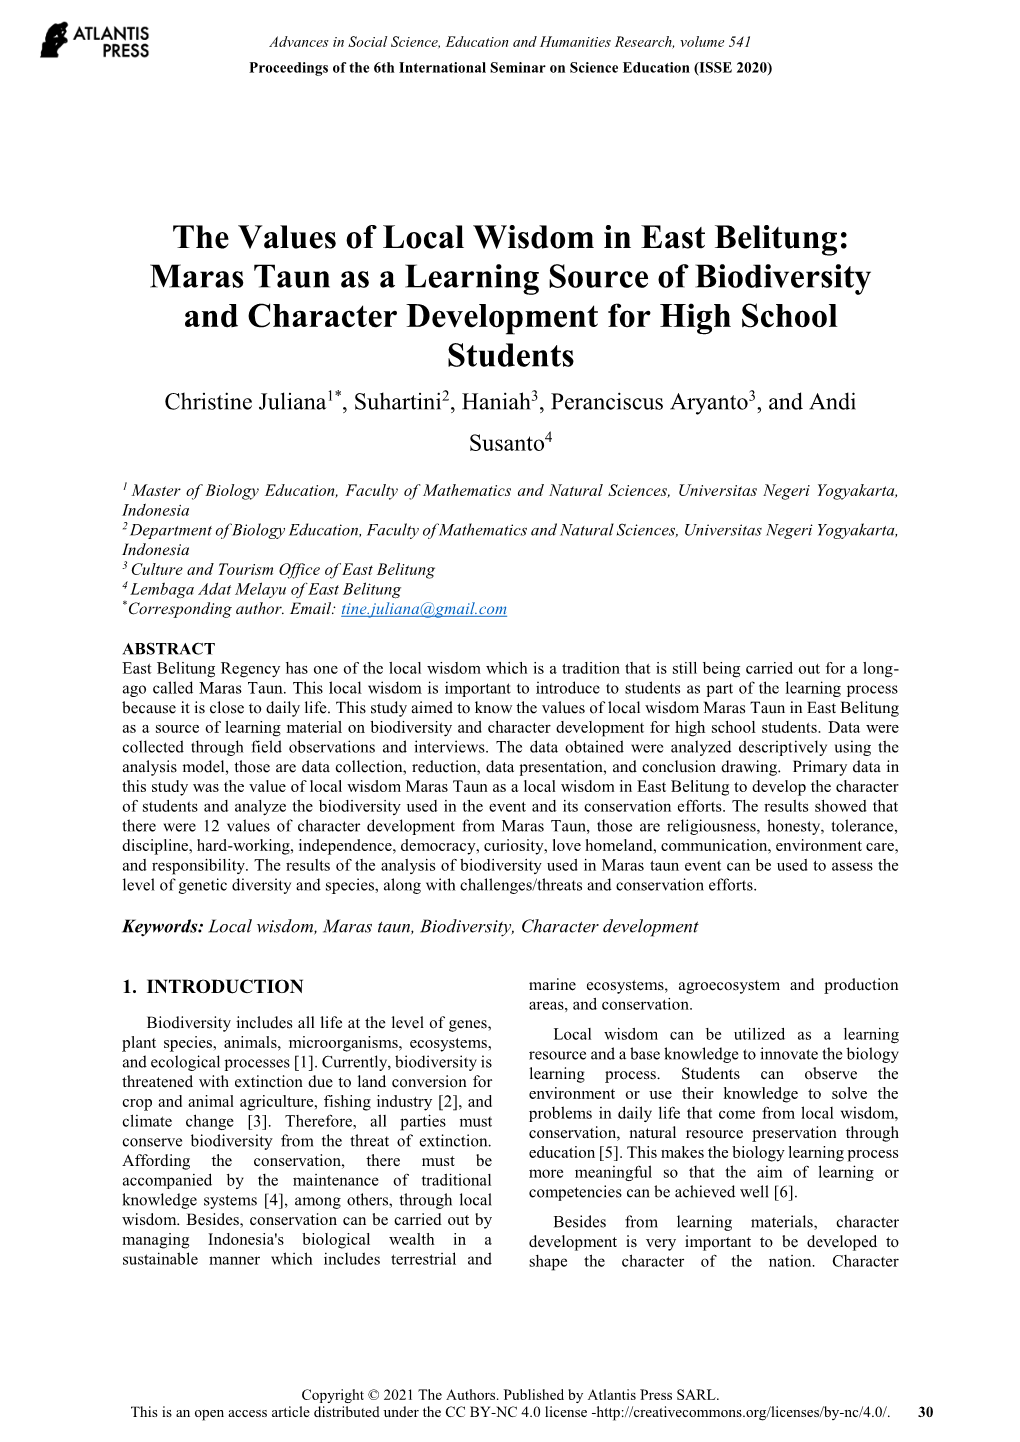 The Values of Local Wisdom in East Belitung: Maras Taun As a Learning